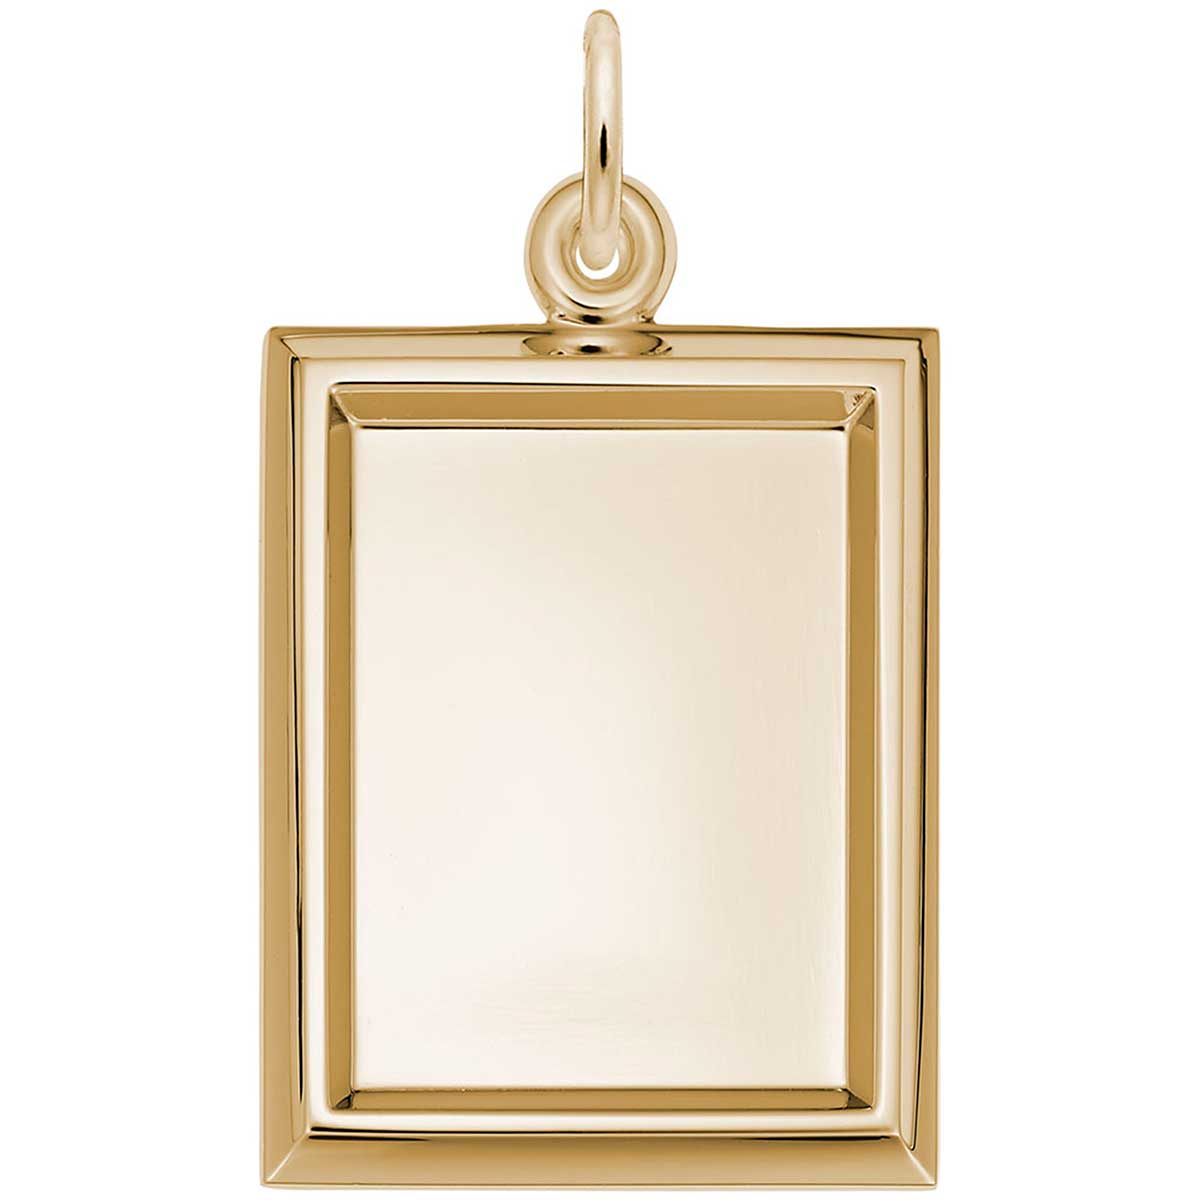 Rectangle Charm in 14k Yellow Gold